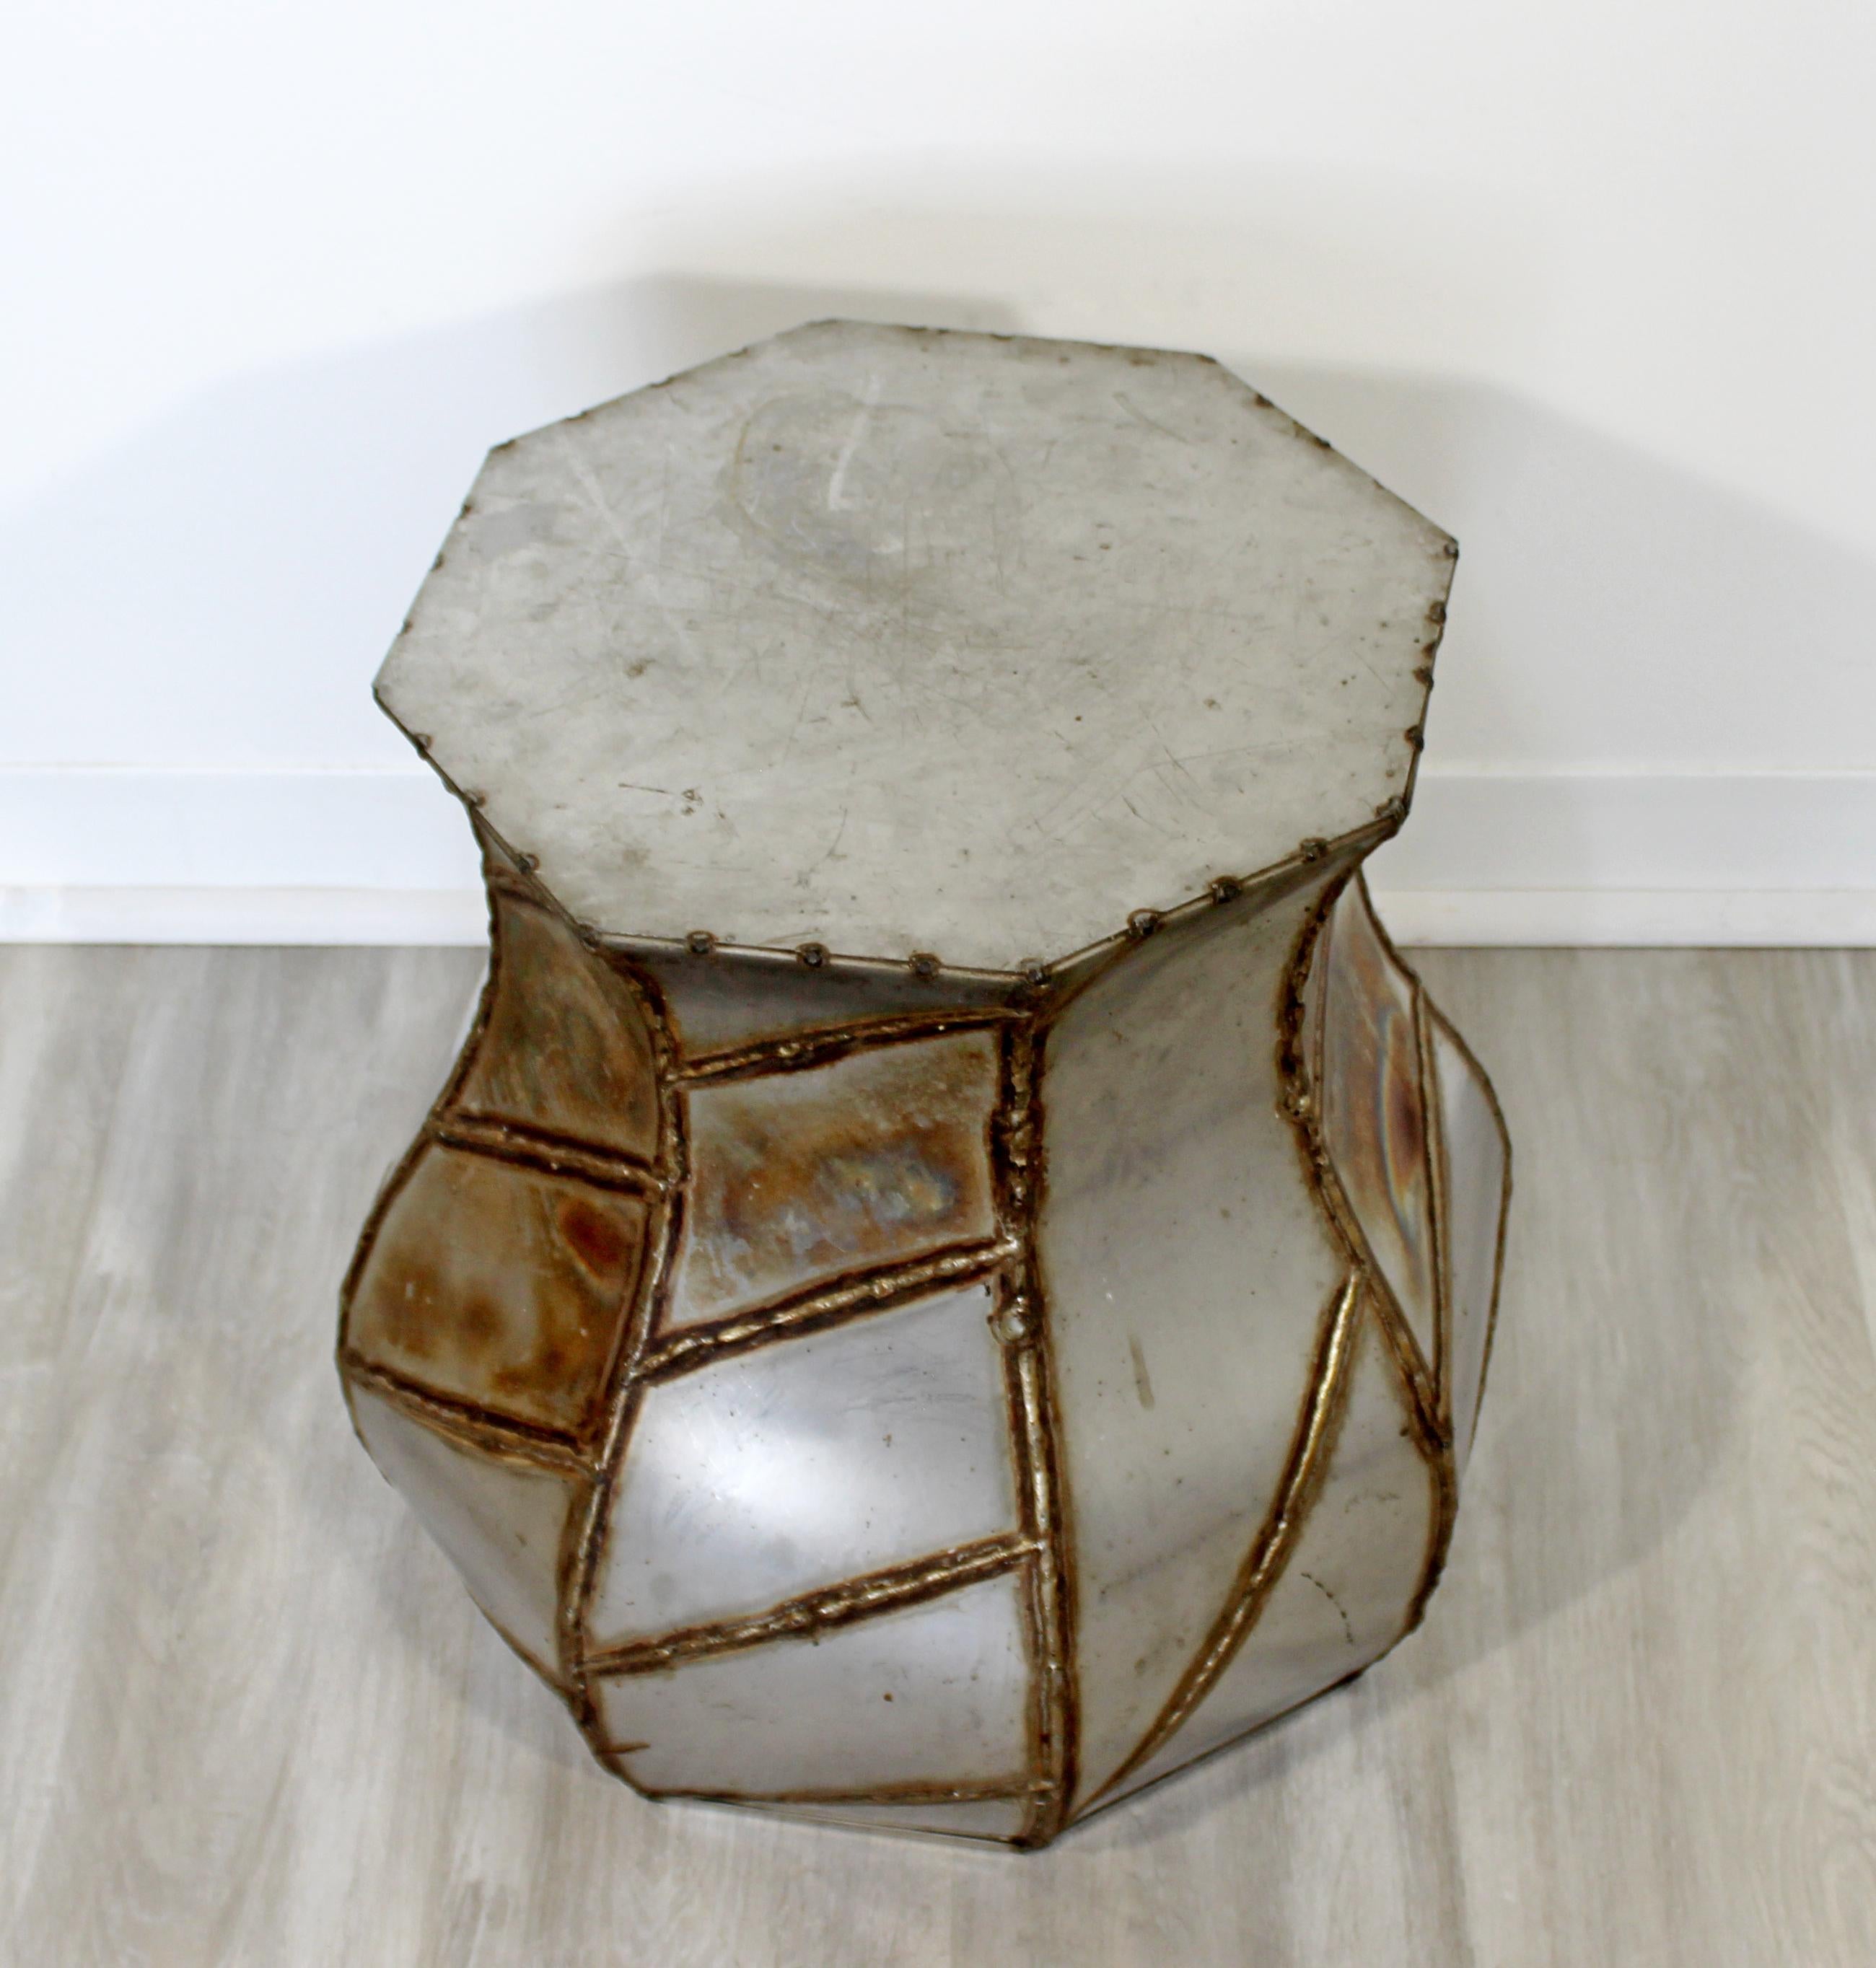 For your consideration is an appealing, Argente style, welded metal, drum side or end table, circa the 1970s. In excellent condition. The dimensions are 14.5